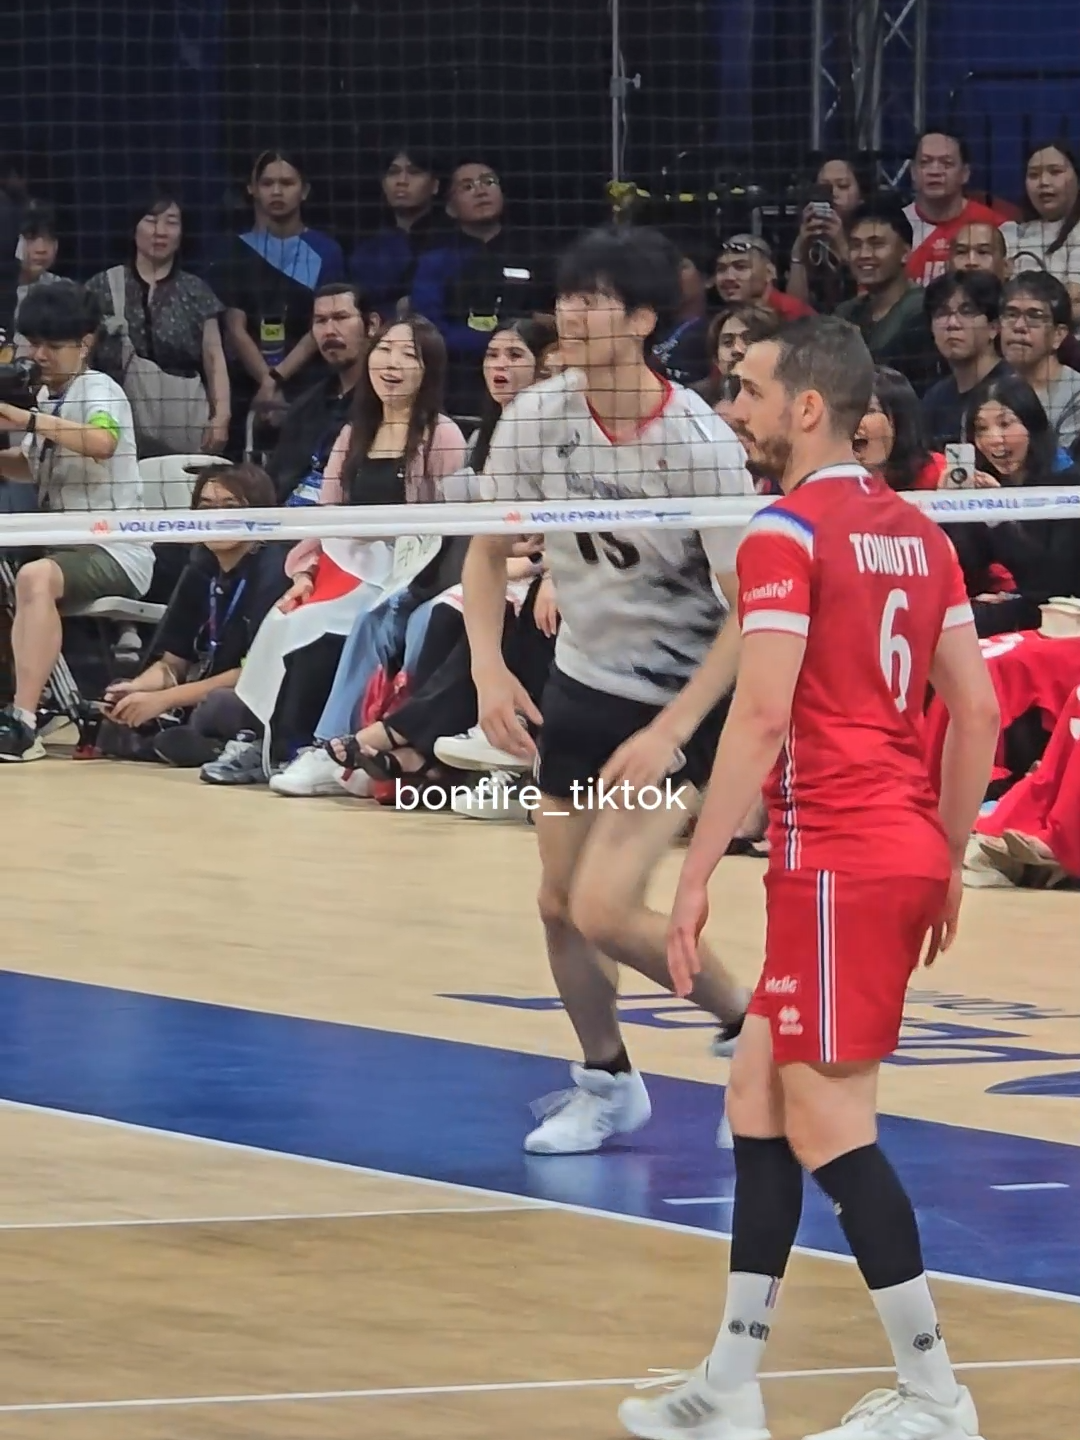 The ever-smiling Kai Masato wins off the block. #vnl #volleyball #volleyballworld #japan